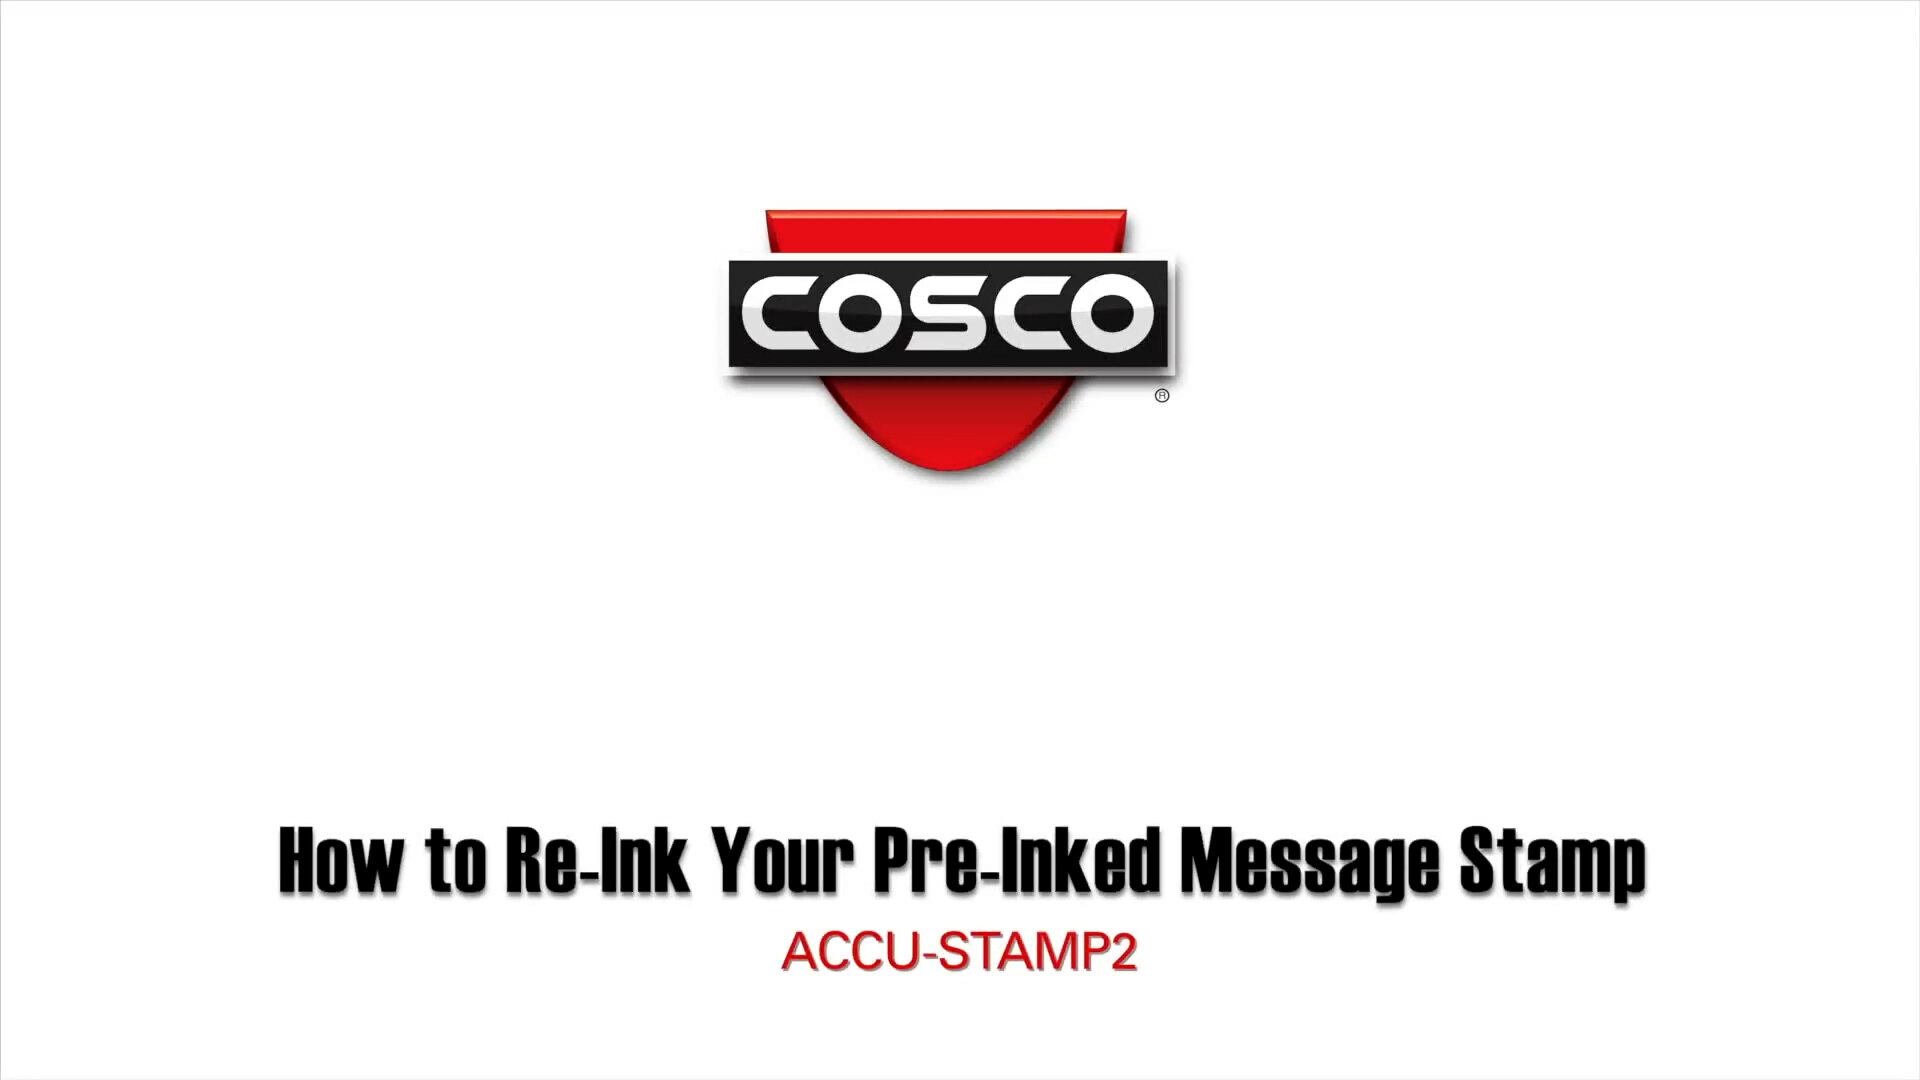 COMPLETED text on Ultimark Pre-inked Message Stamp with Red Ink 